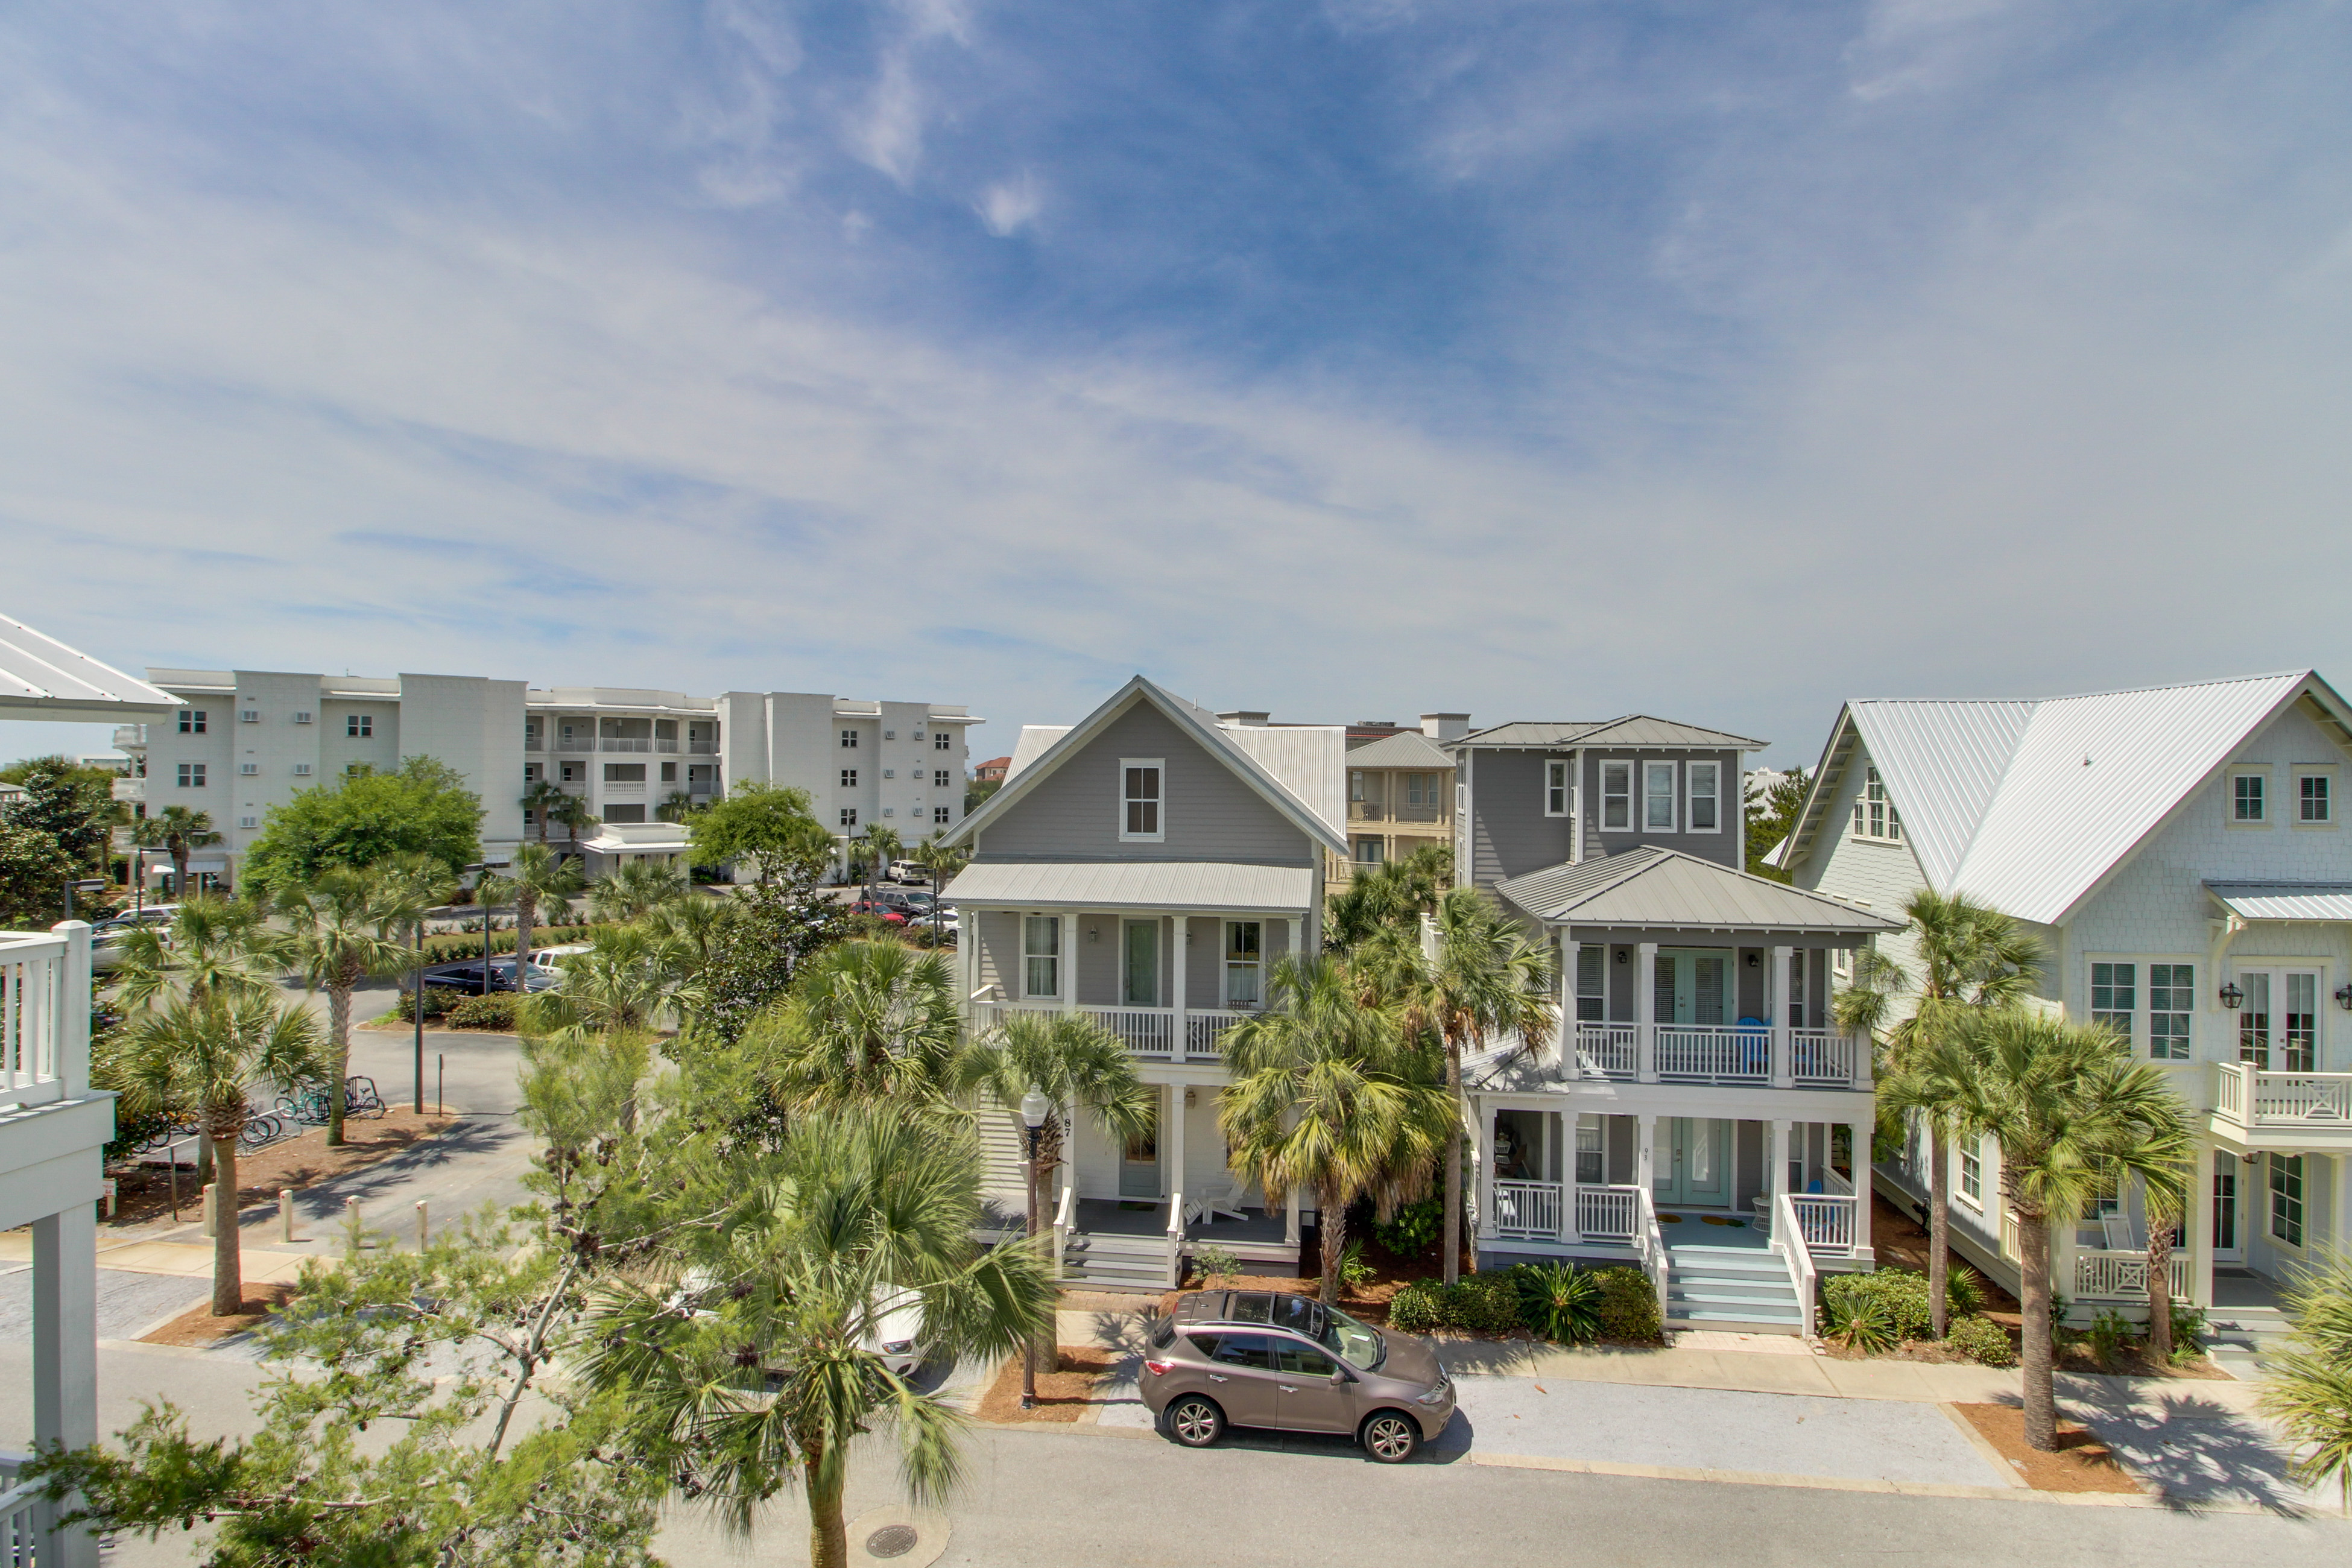 The Lemon Drop - Main House House / Cottage rental in 30a Beach House Rentals in Highway 30-A Florida - #37